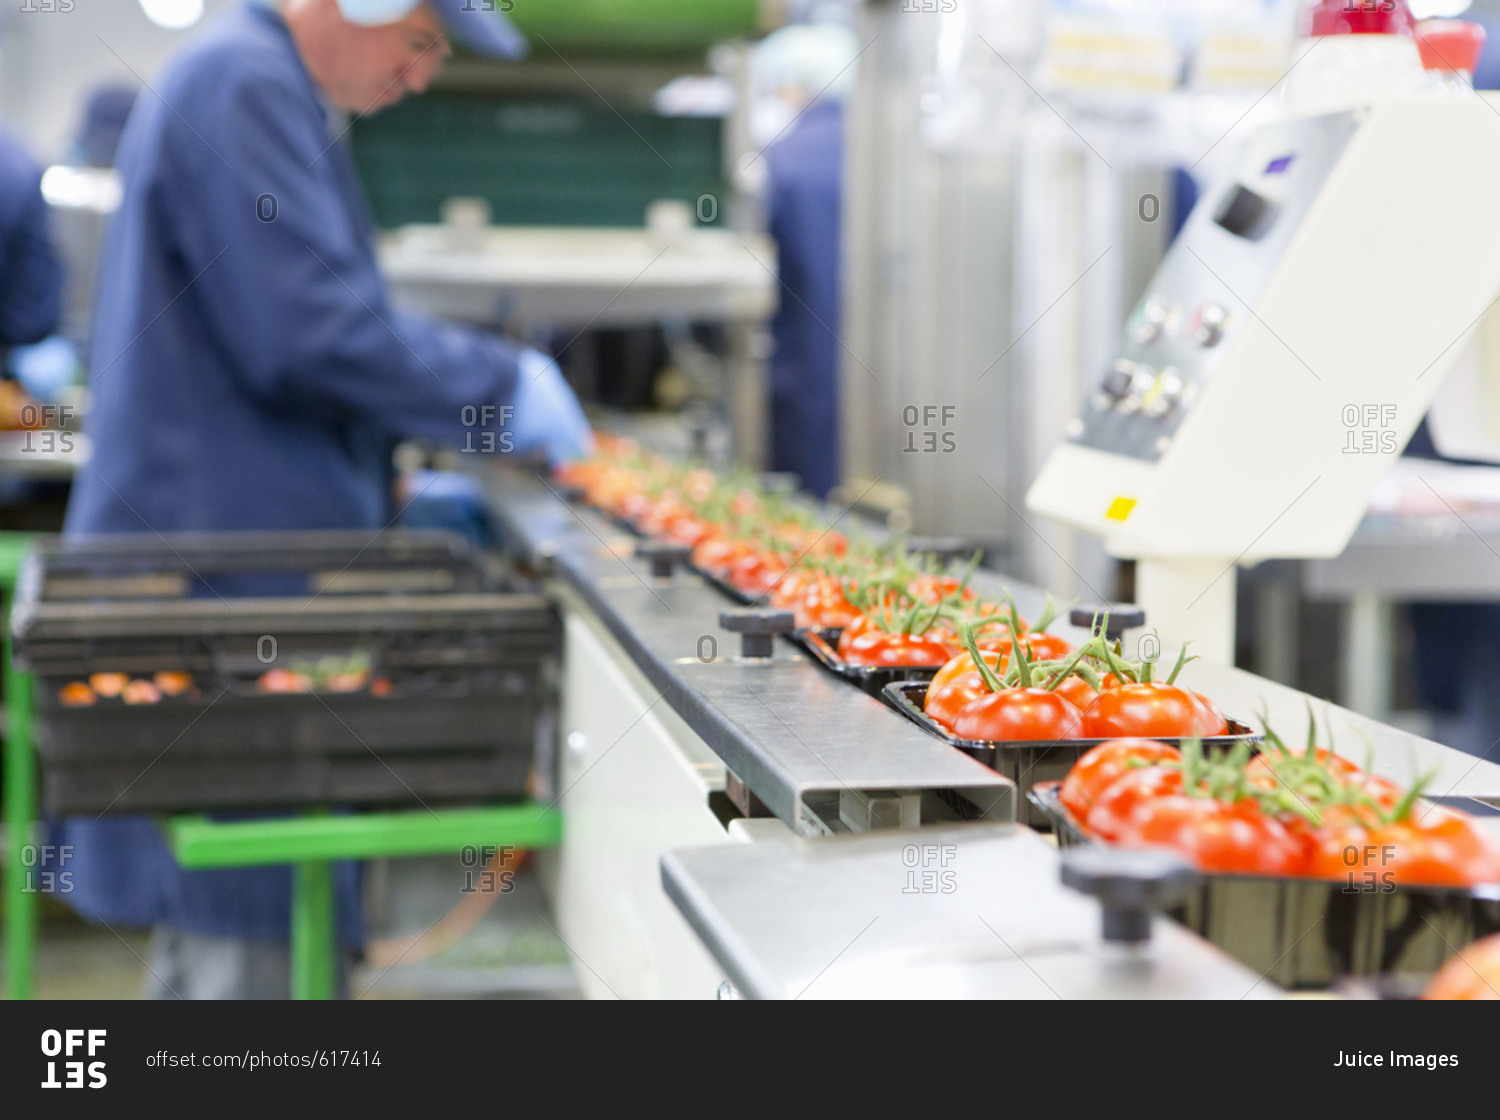 Worker packing ripe red vine tomatoes on production line in food processing plant